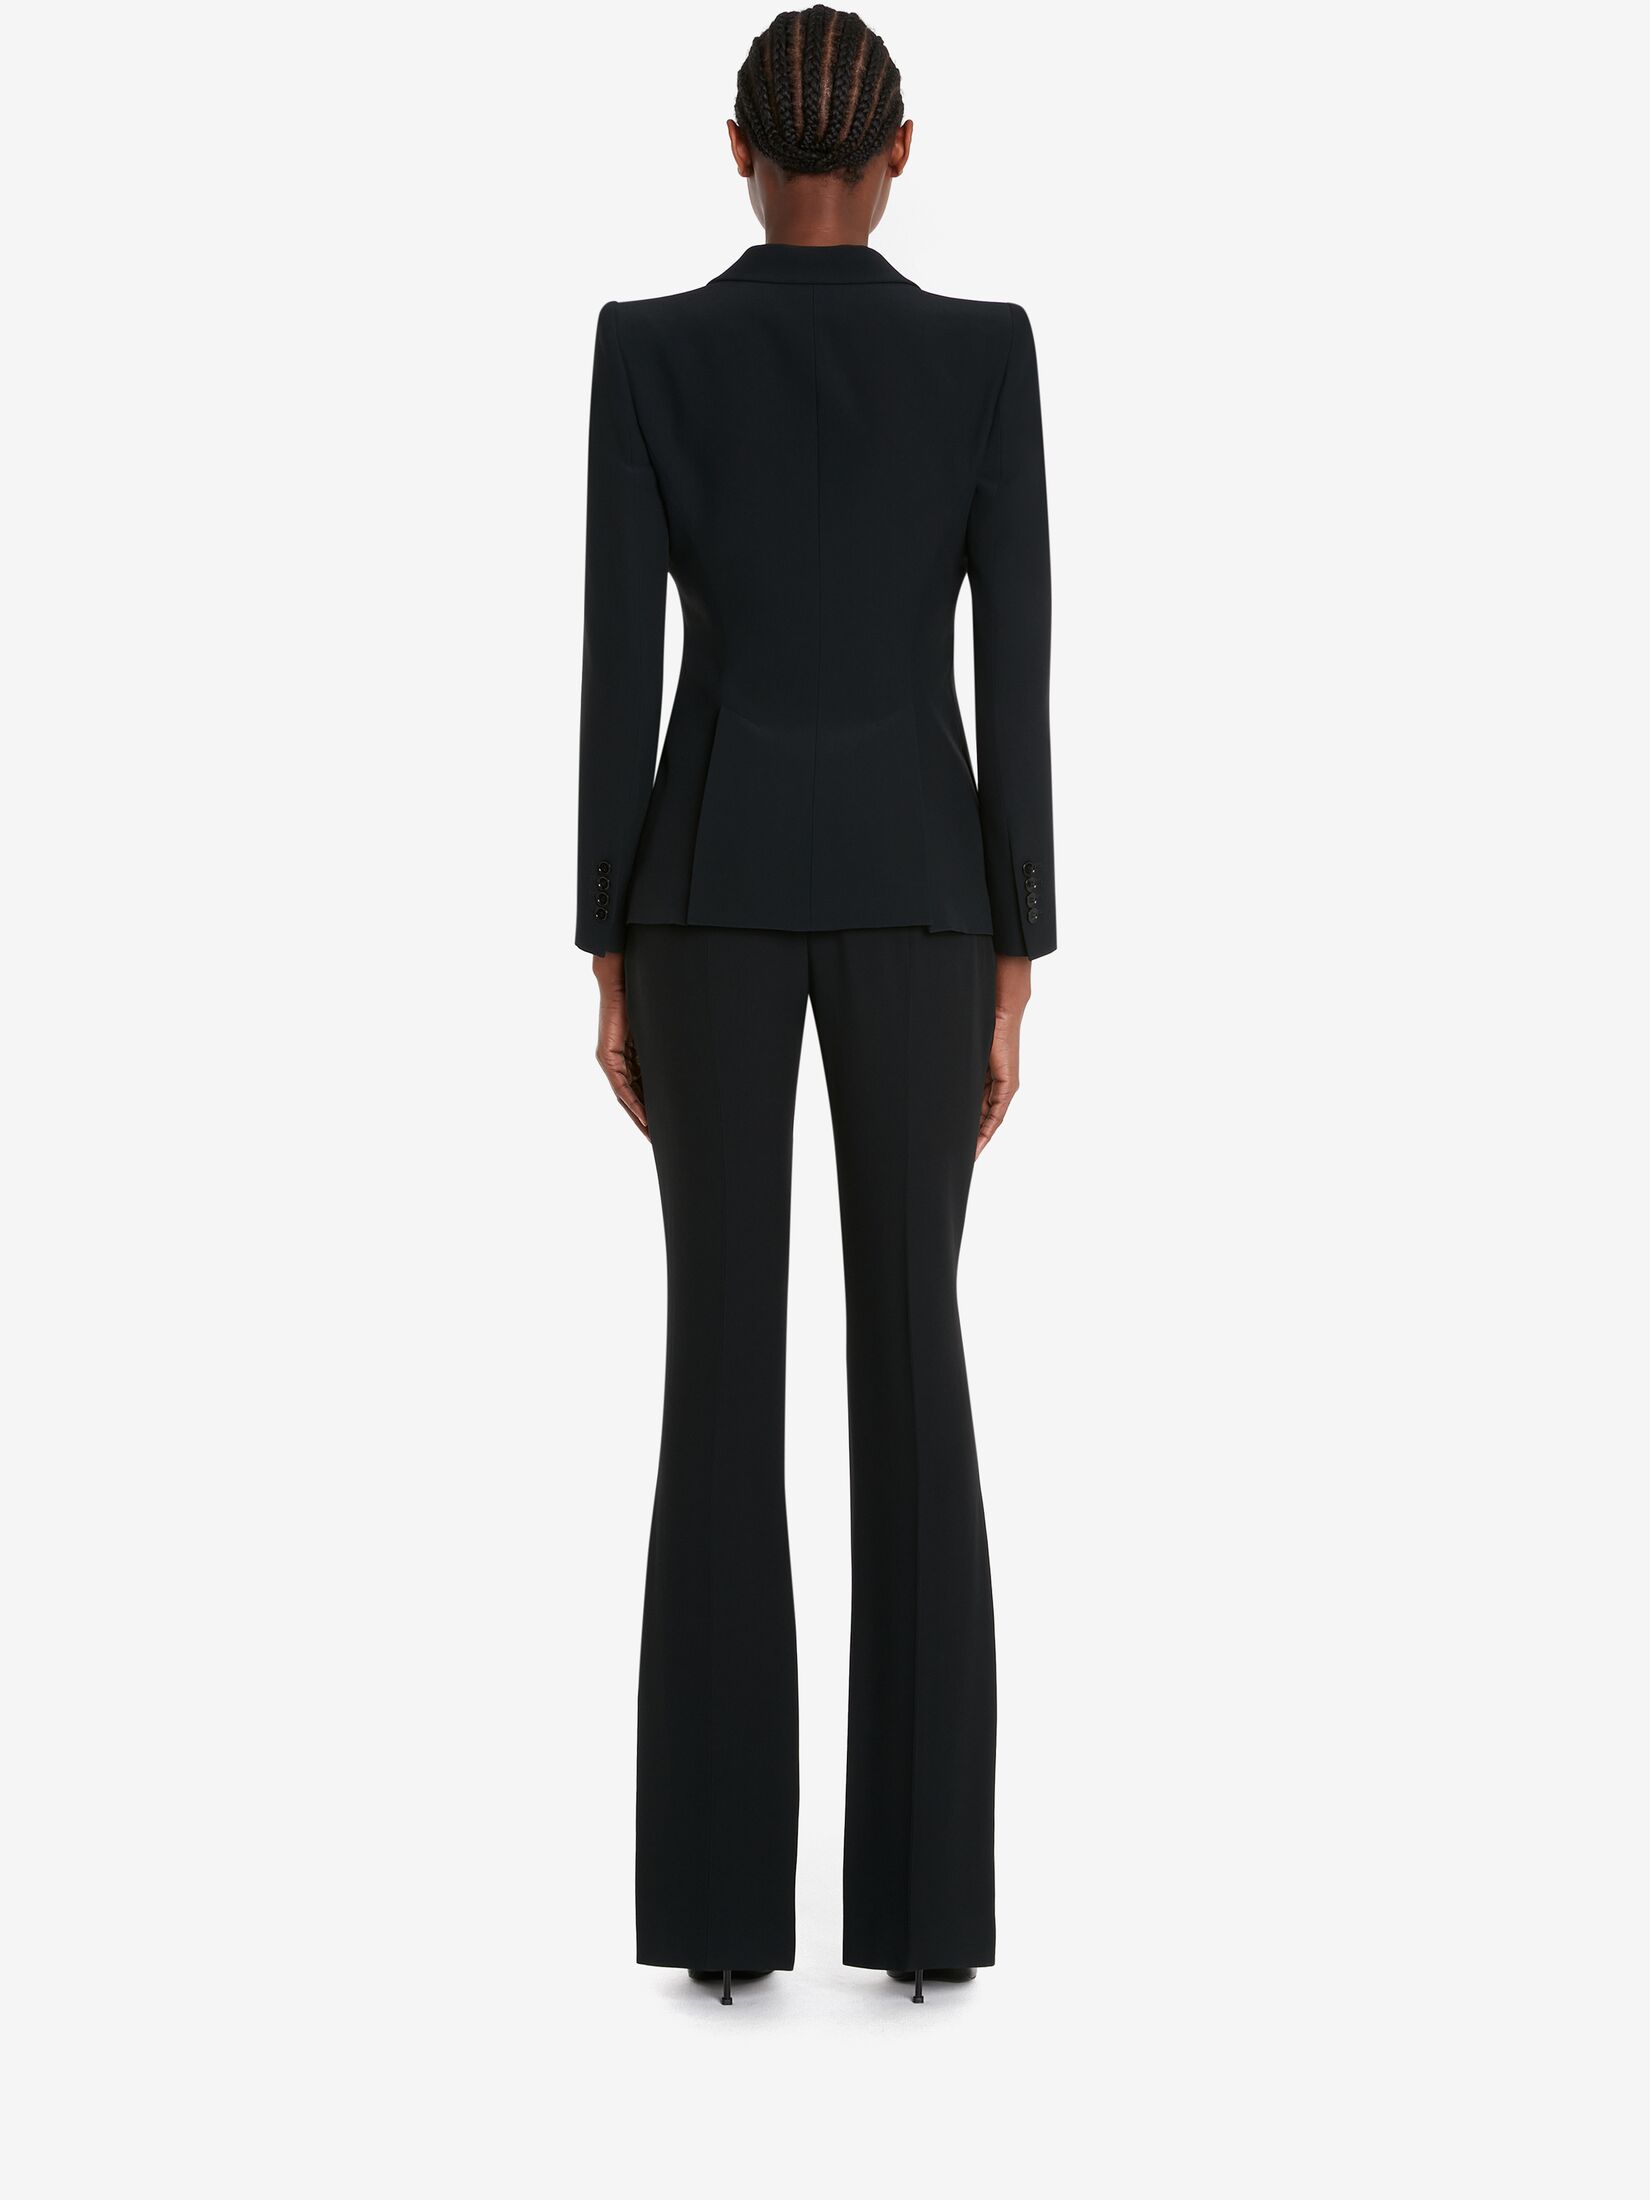 Narrow Bootcut Trousers in Night Shade